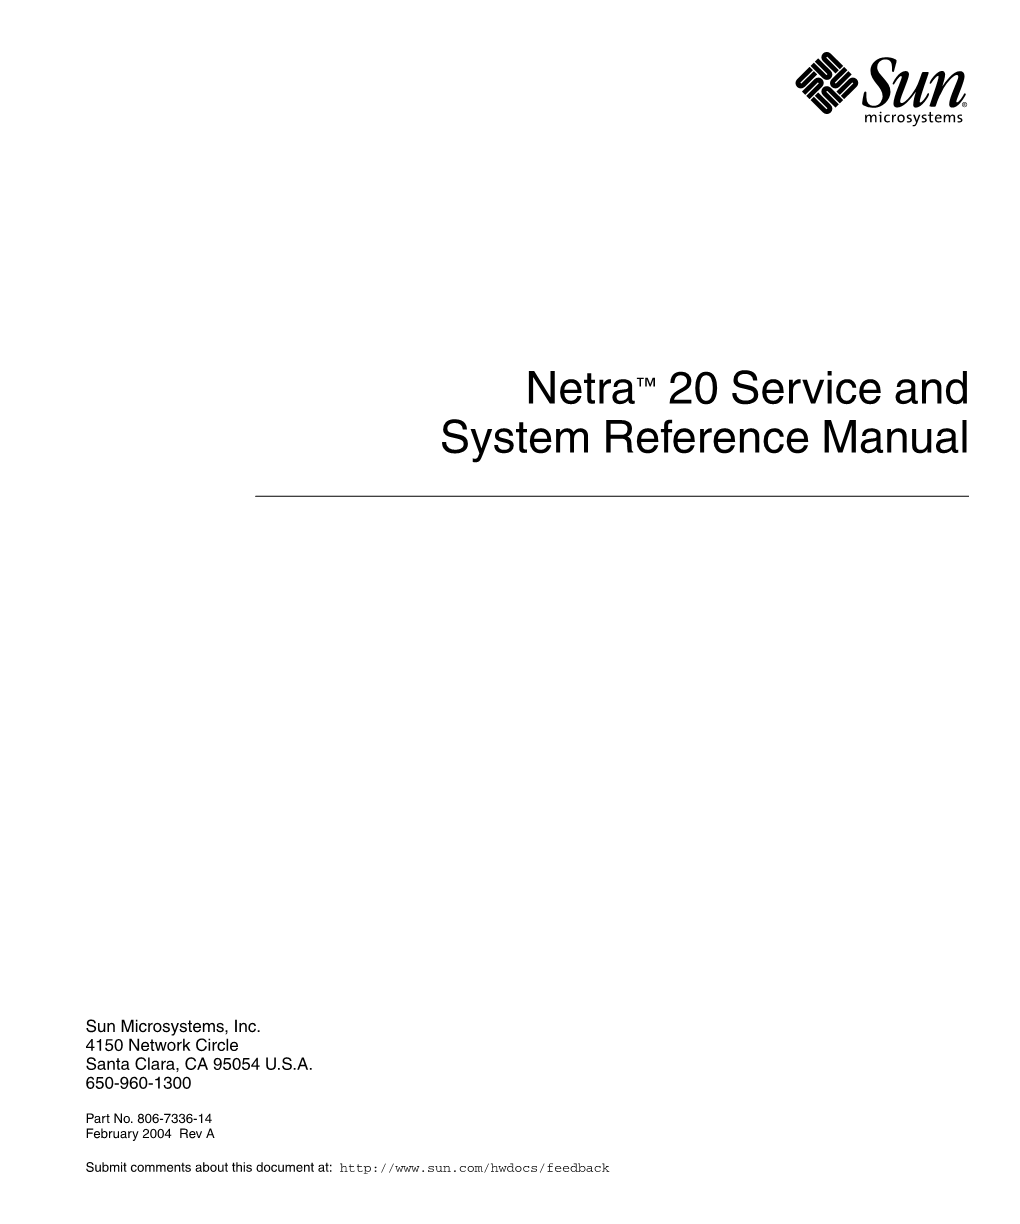 Netra 20 Service and System Reference Manual